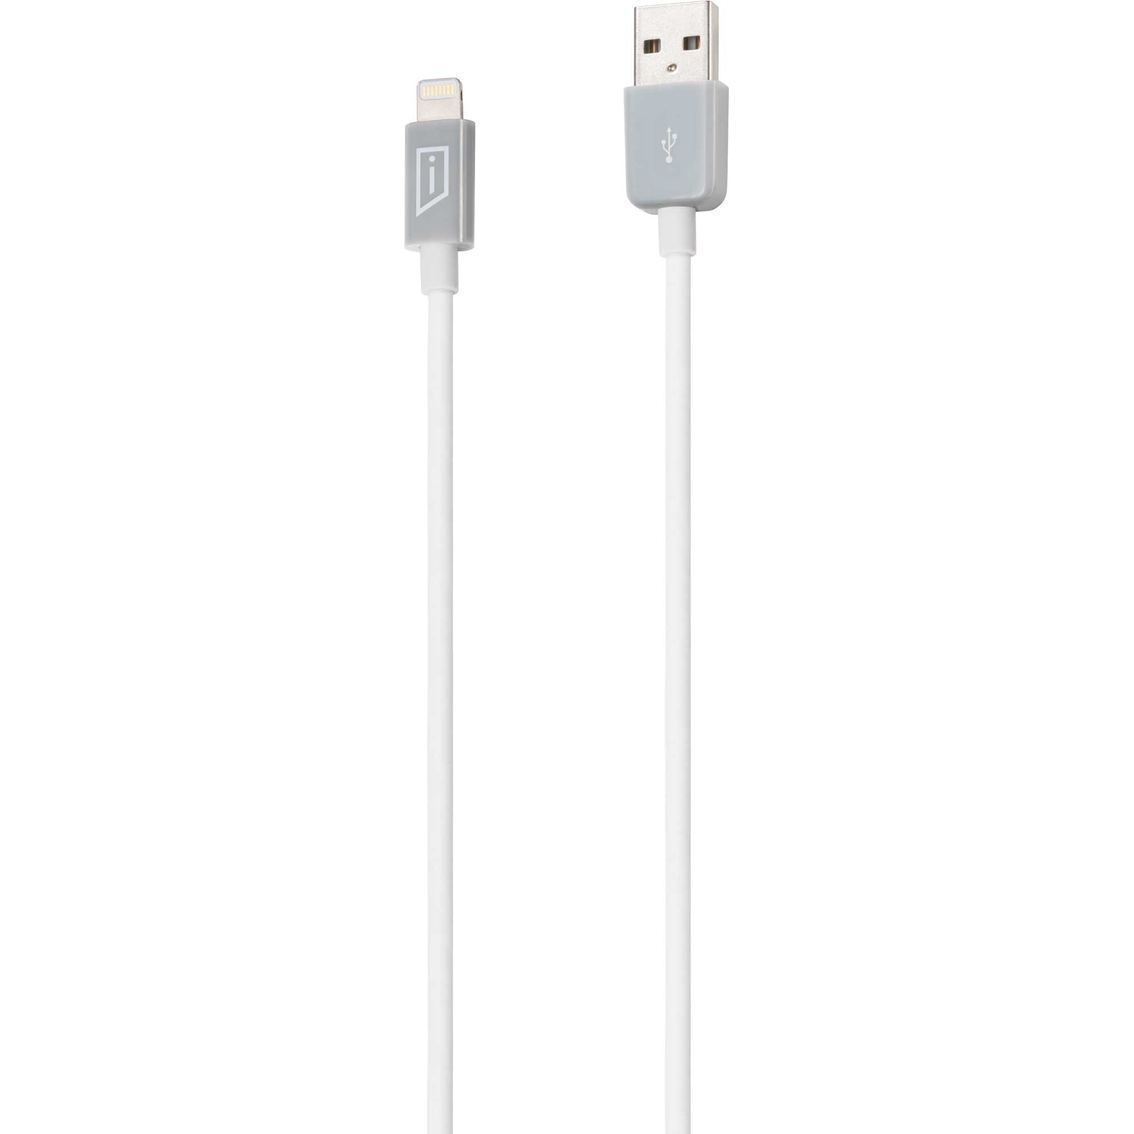 Targus iStore Lightning Charge 6.7 ft. Cable - Image 2 of 3